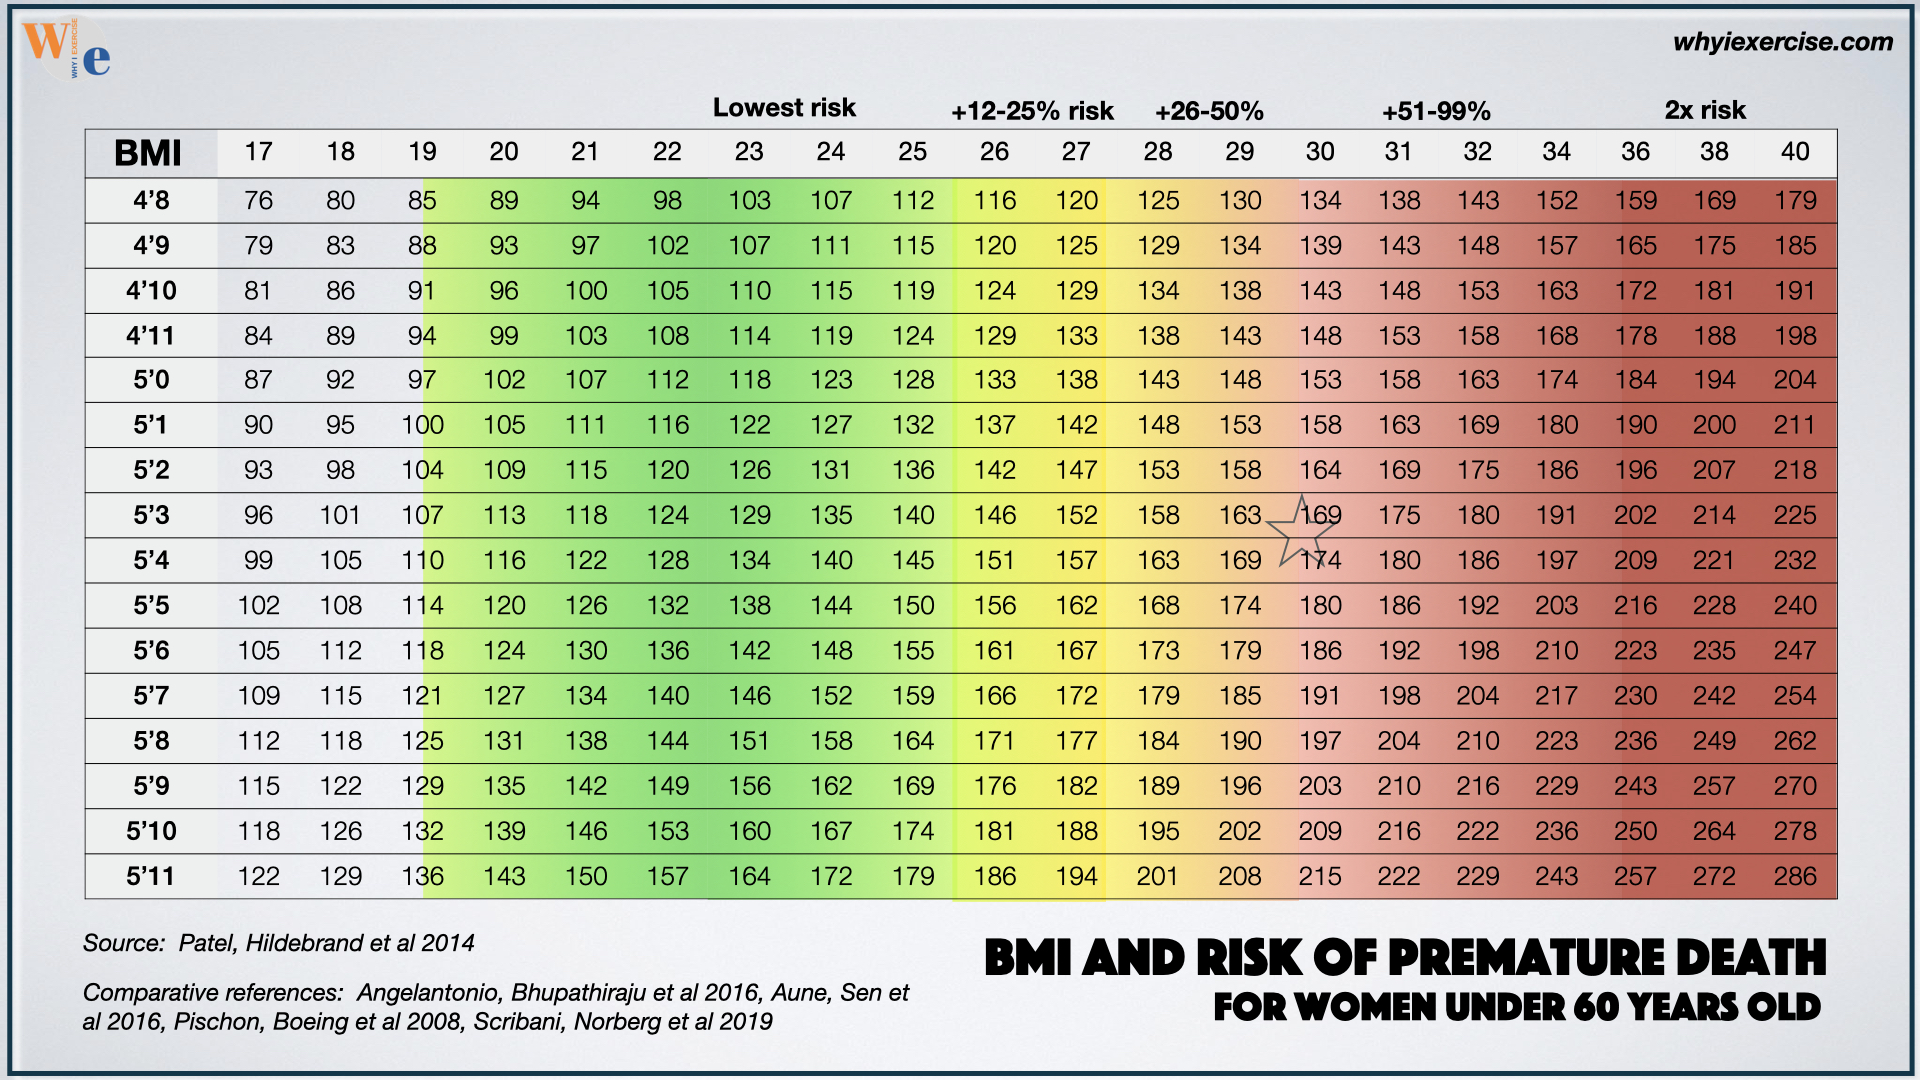 https://www.whyiexercise.com/images/BMI-and-risk-of-premature-death-in-women.jpg